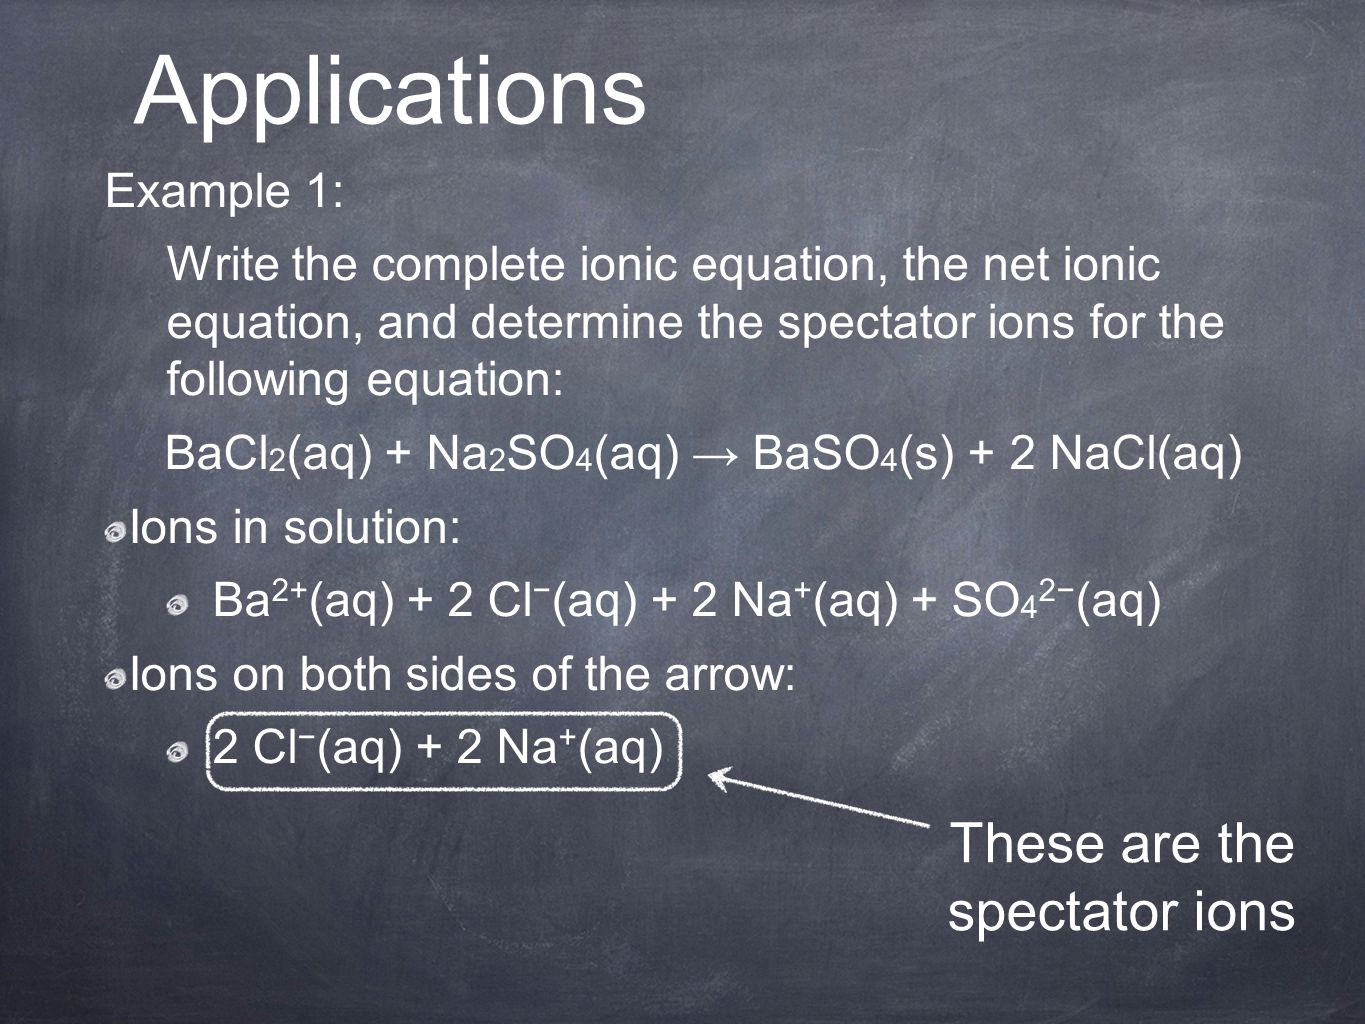 Example 1: Write the complete ionic equation, the net ionic equation, and determine the spectator ions for the following equation: BaCl 2 (aq) + Na 2 SO 4 (aq) → BaSO 4 (s) + 2 NaCl(aq) Ions in solution: Ba 2+ (aq) + 2 Cl − (aq) + 2 Na + (aq) + SO 4 2− (aq) Ions on both sides of the arrow: 2 Cl − (aq) + 2 Na + (aq) Applications These are the spectator ions